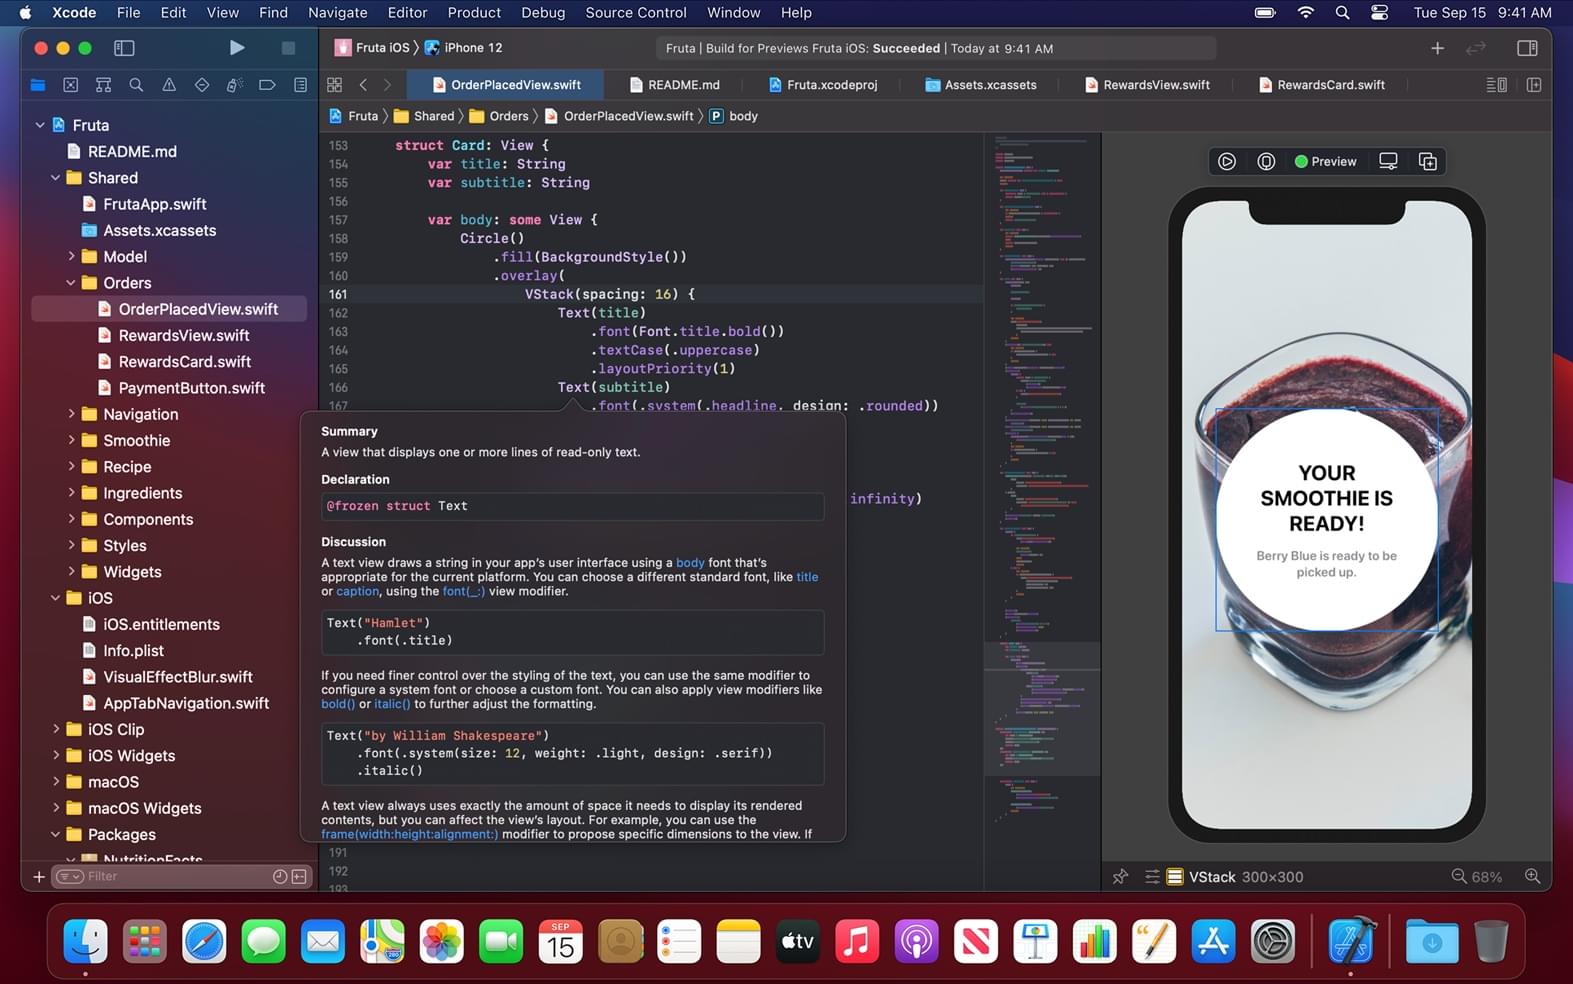 The Xcode 13 Integrated Development Environment interface